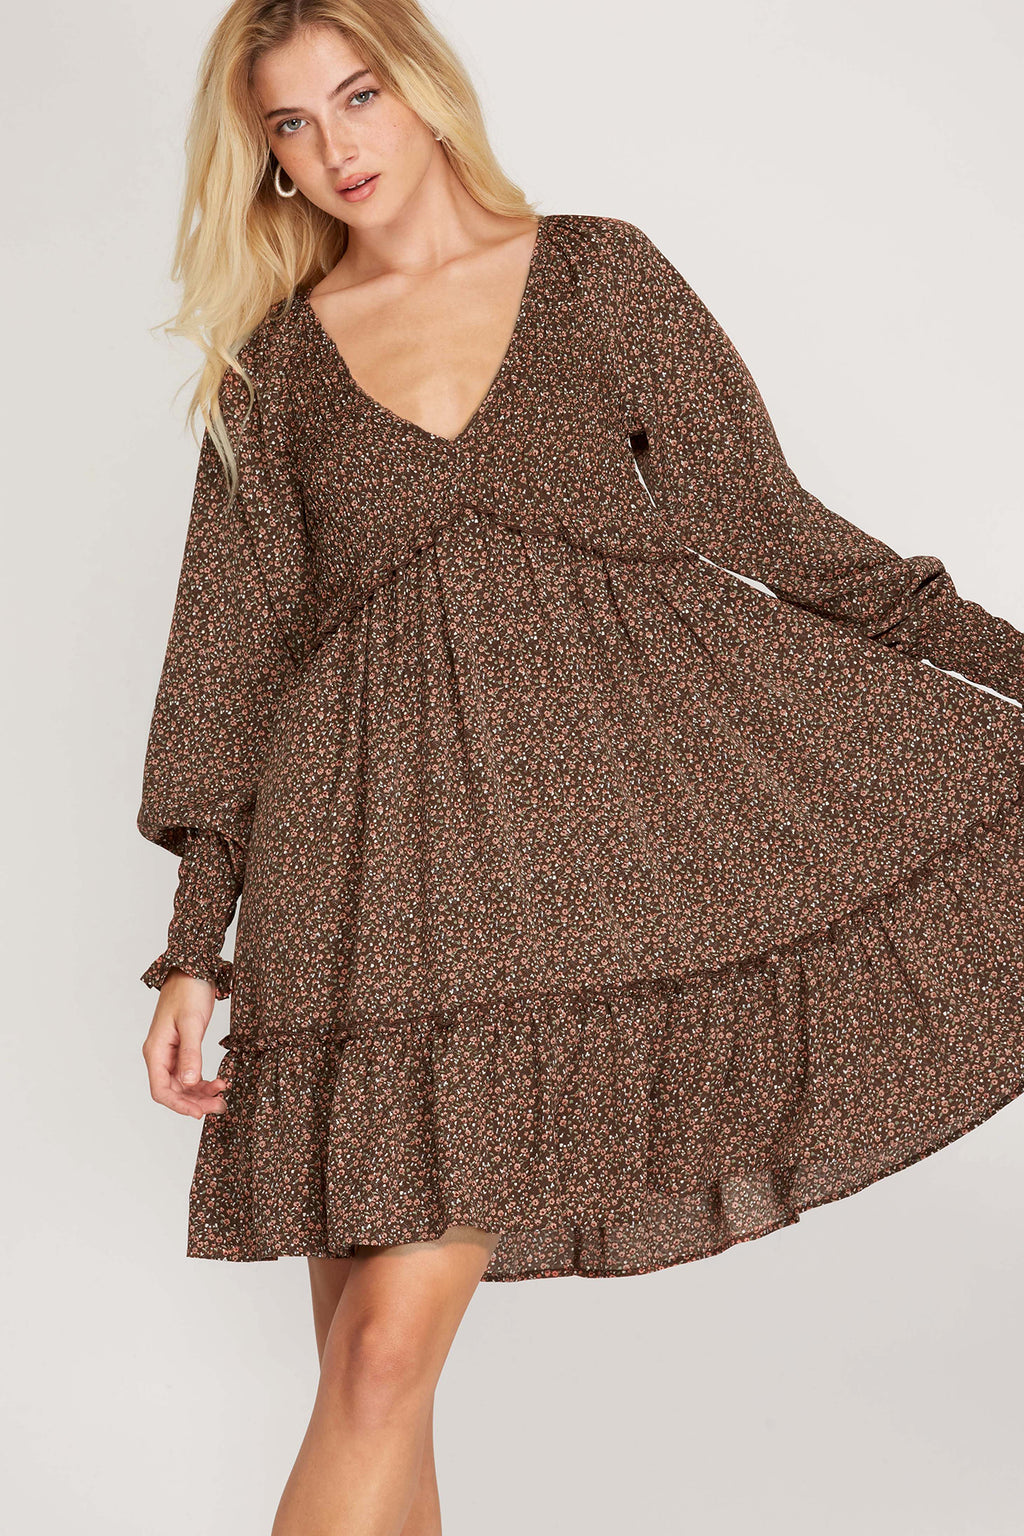 Forever Fall Floral Dress